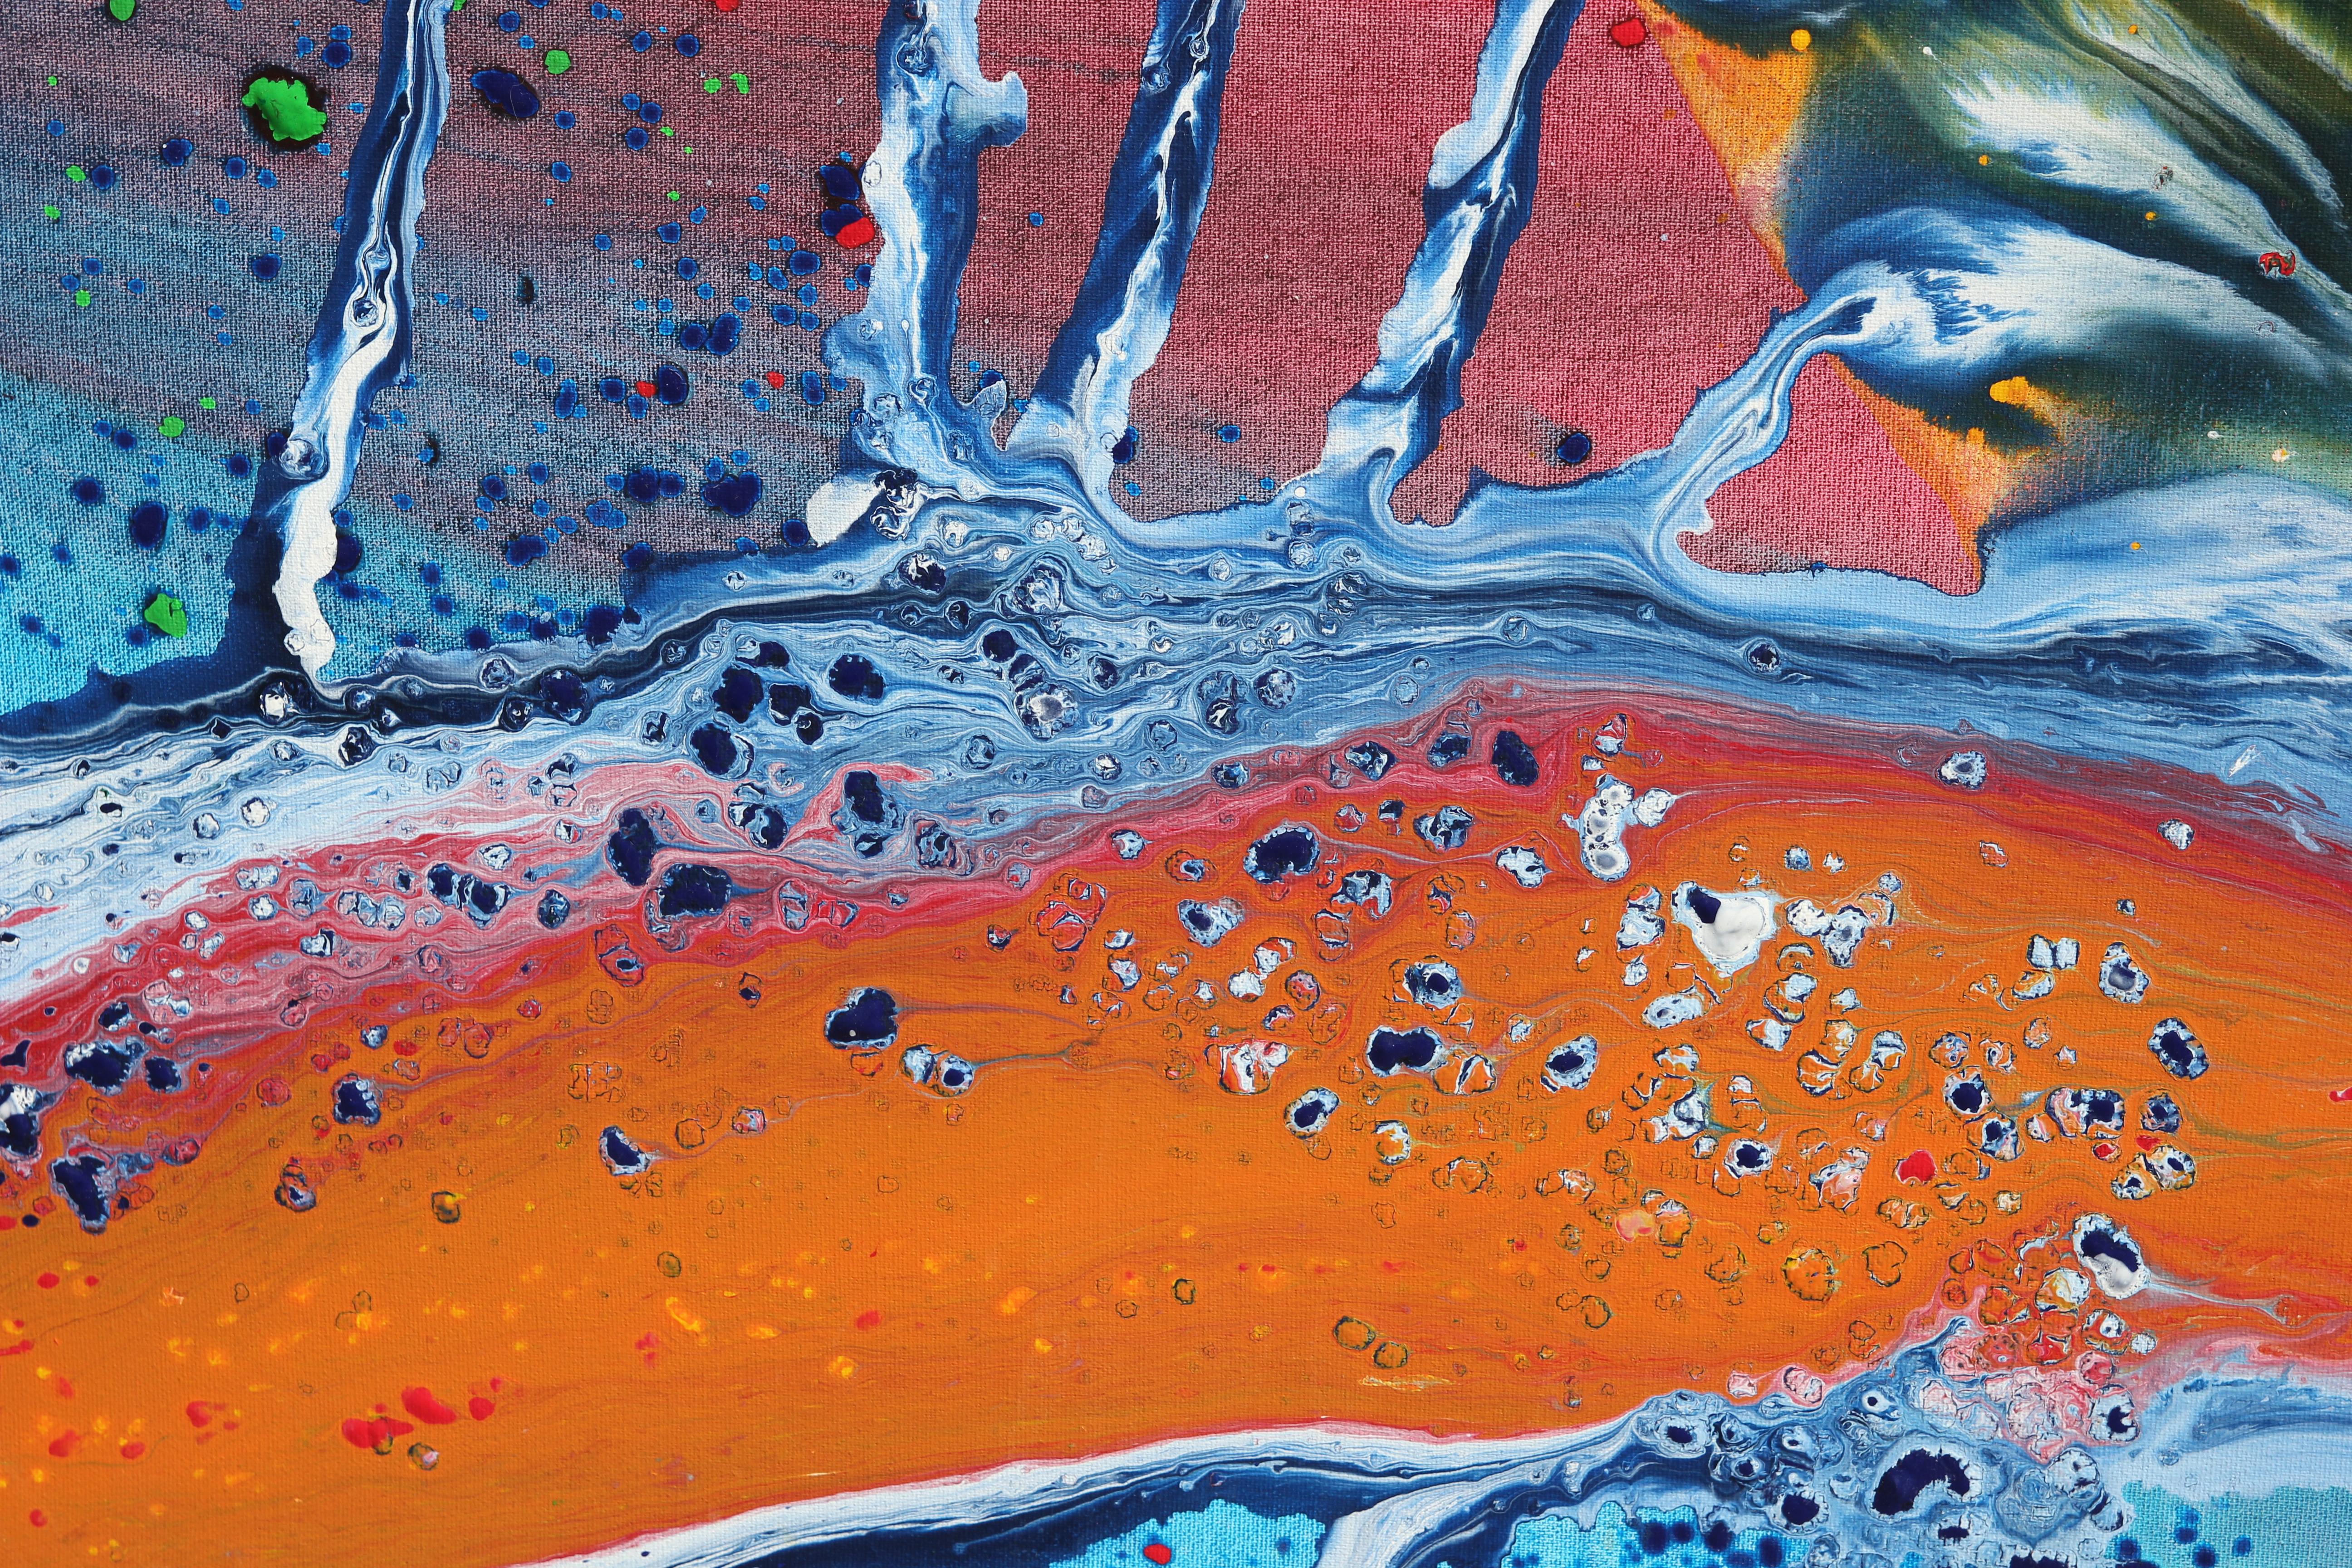 Multi-color acrylic pour abstract painting with hints of blue, red, orange and yellow. 
The painting's composition is created through the fascinating fluid painting technique, in which multiple colors of paint our poured on top of one another.